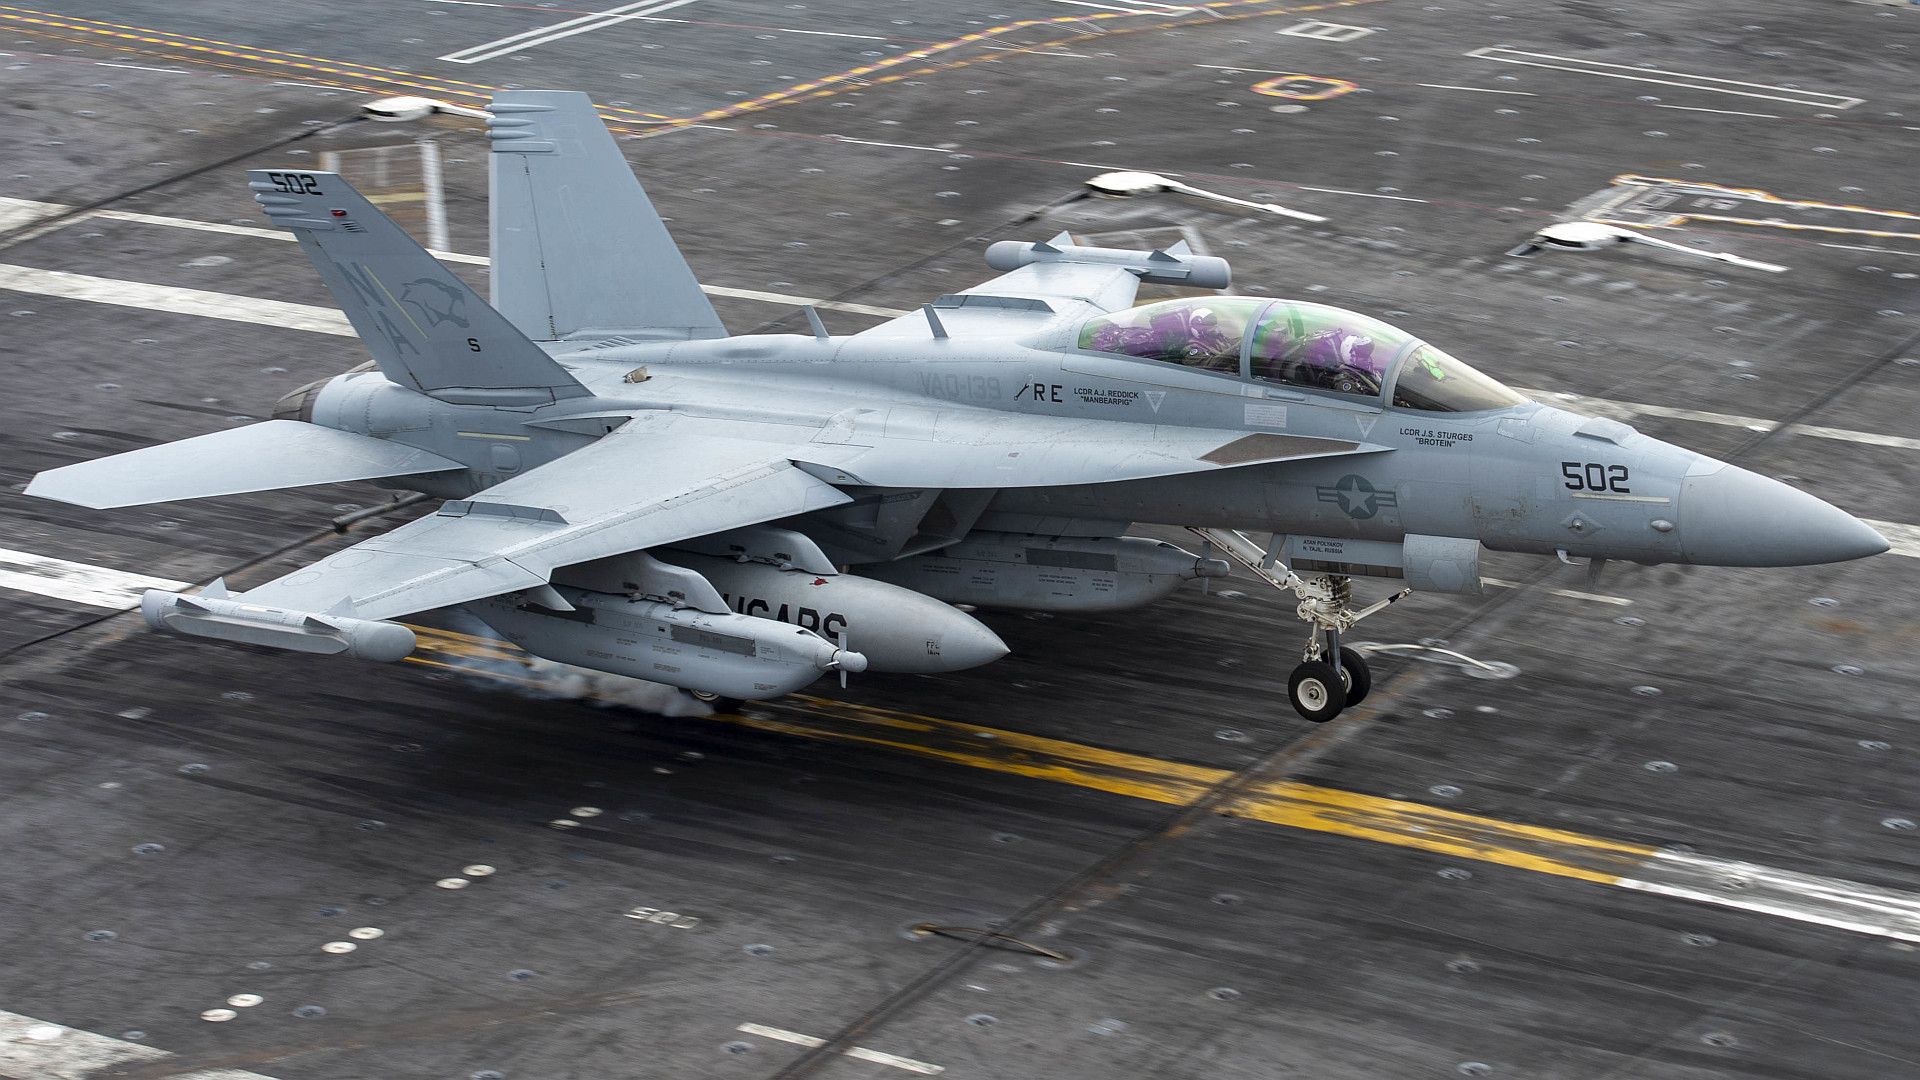 18G Growler From The Cougars Of Electronic Attack Squadron 134 Performs An Arrested Gear Landing On The Flight Deck Aboard The Aircraft Carrier USS Nimitz